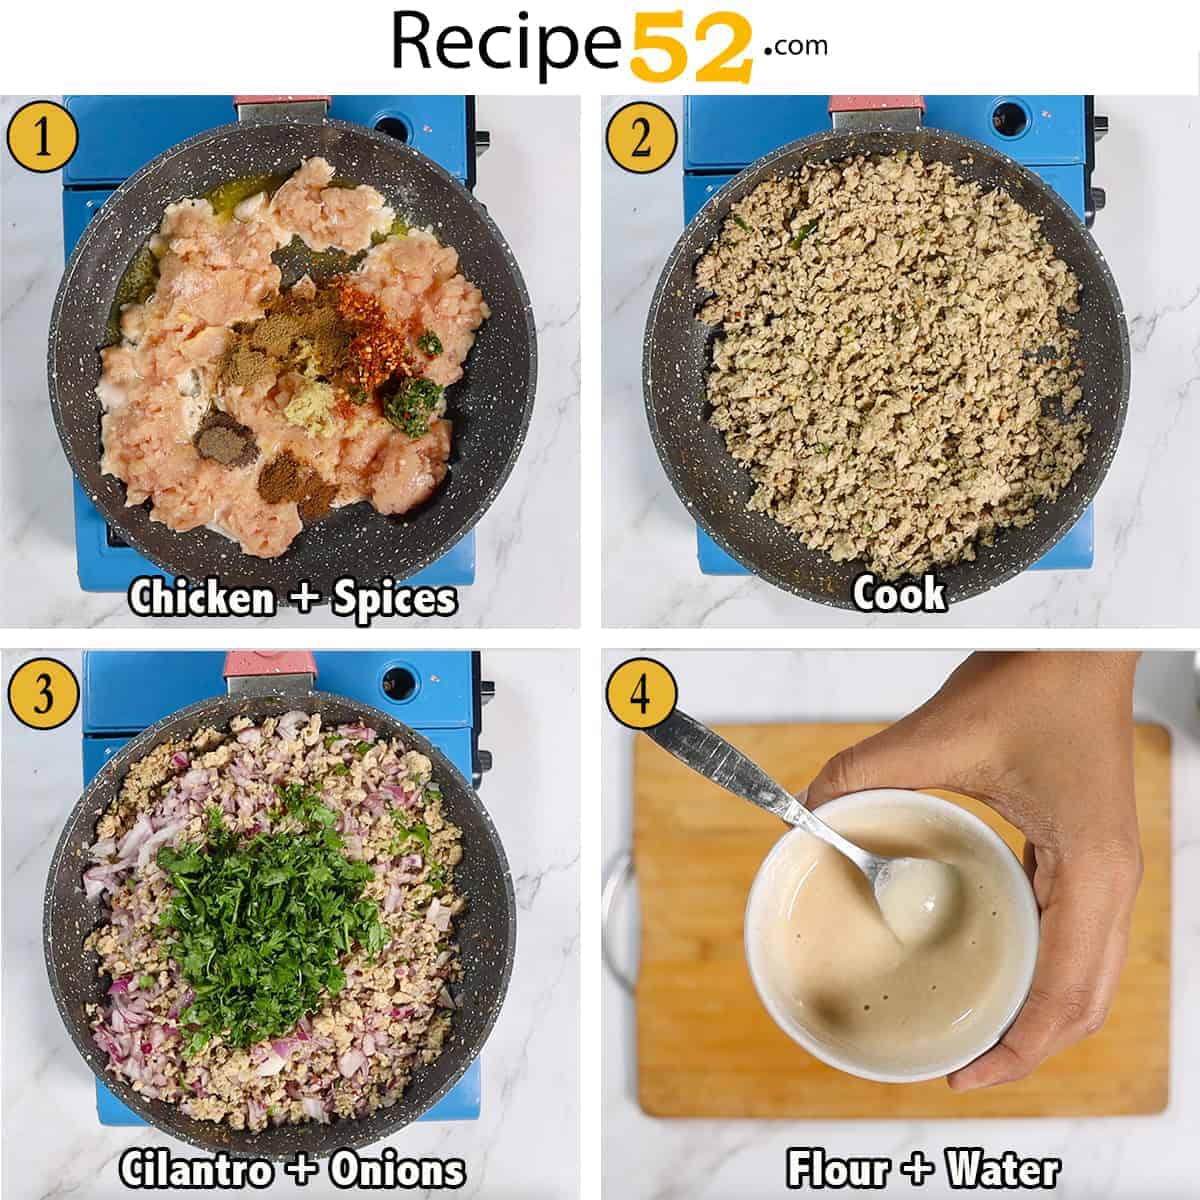 Steps of cooking chicken filling.